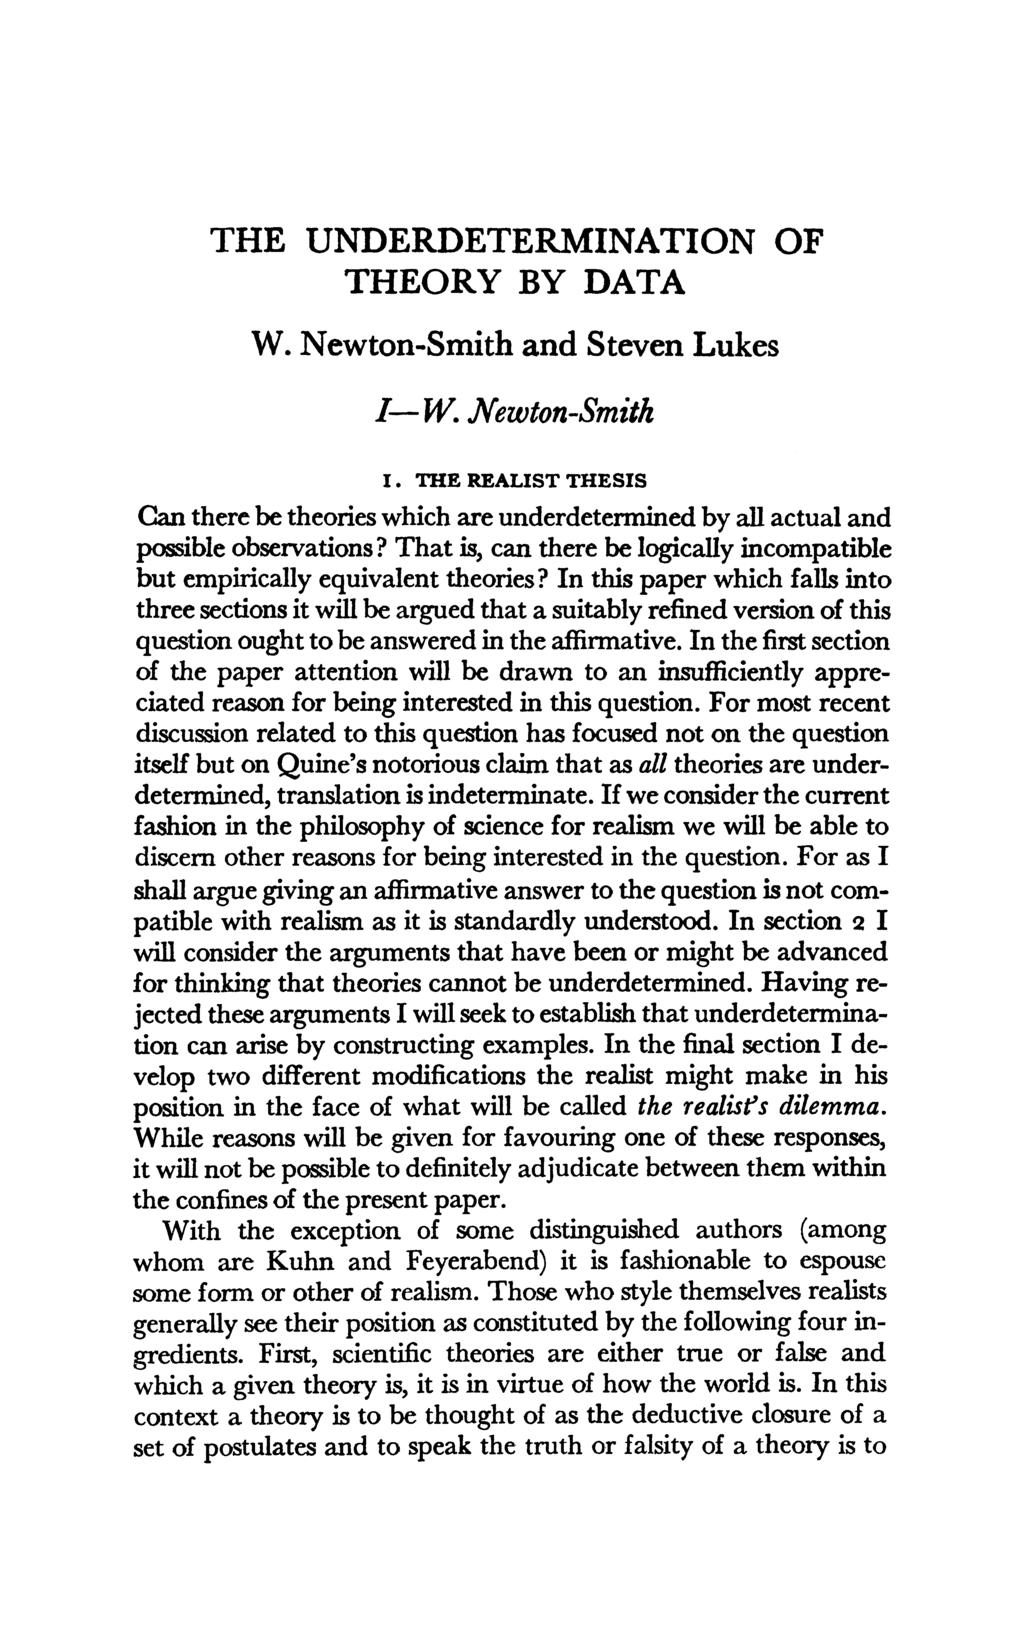 THE UNDERDETERMINATION OF THEORY BY DATA W. Newton-Smith and Steven Lukes I-- W. Newton-Smith I.